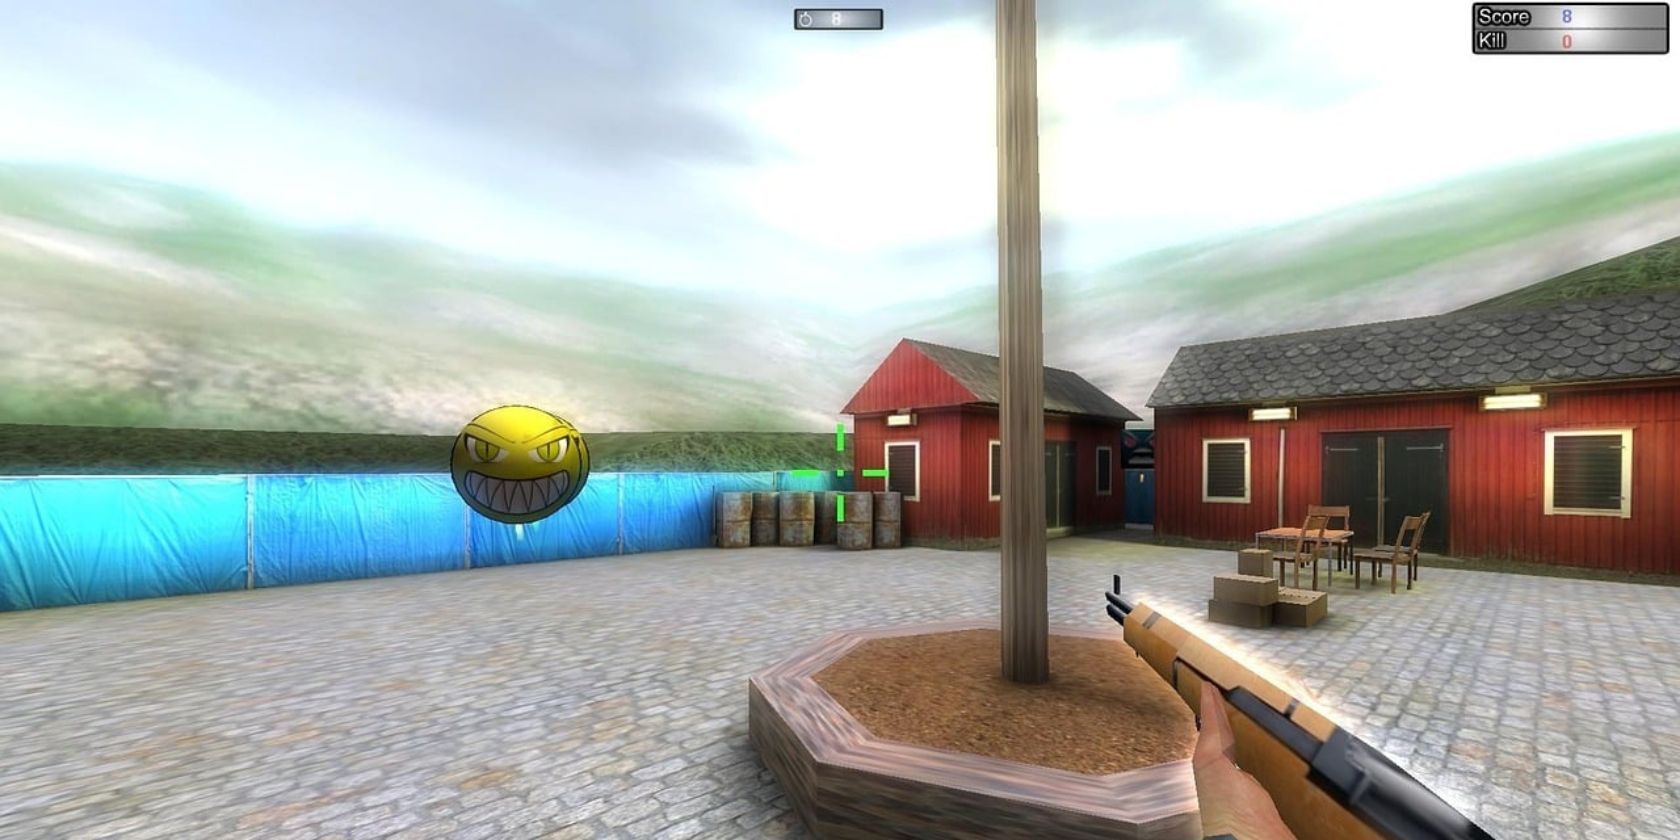 An FPS game in Roblox